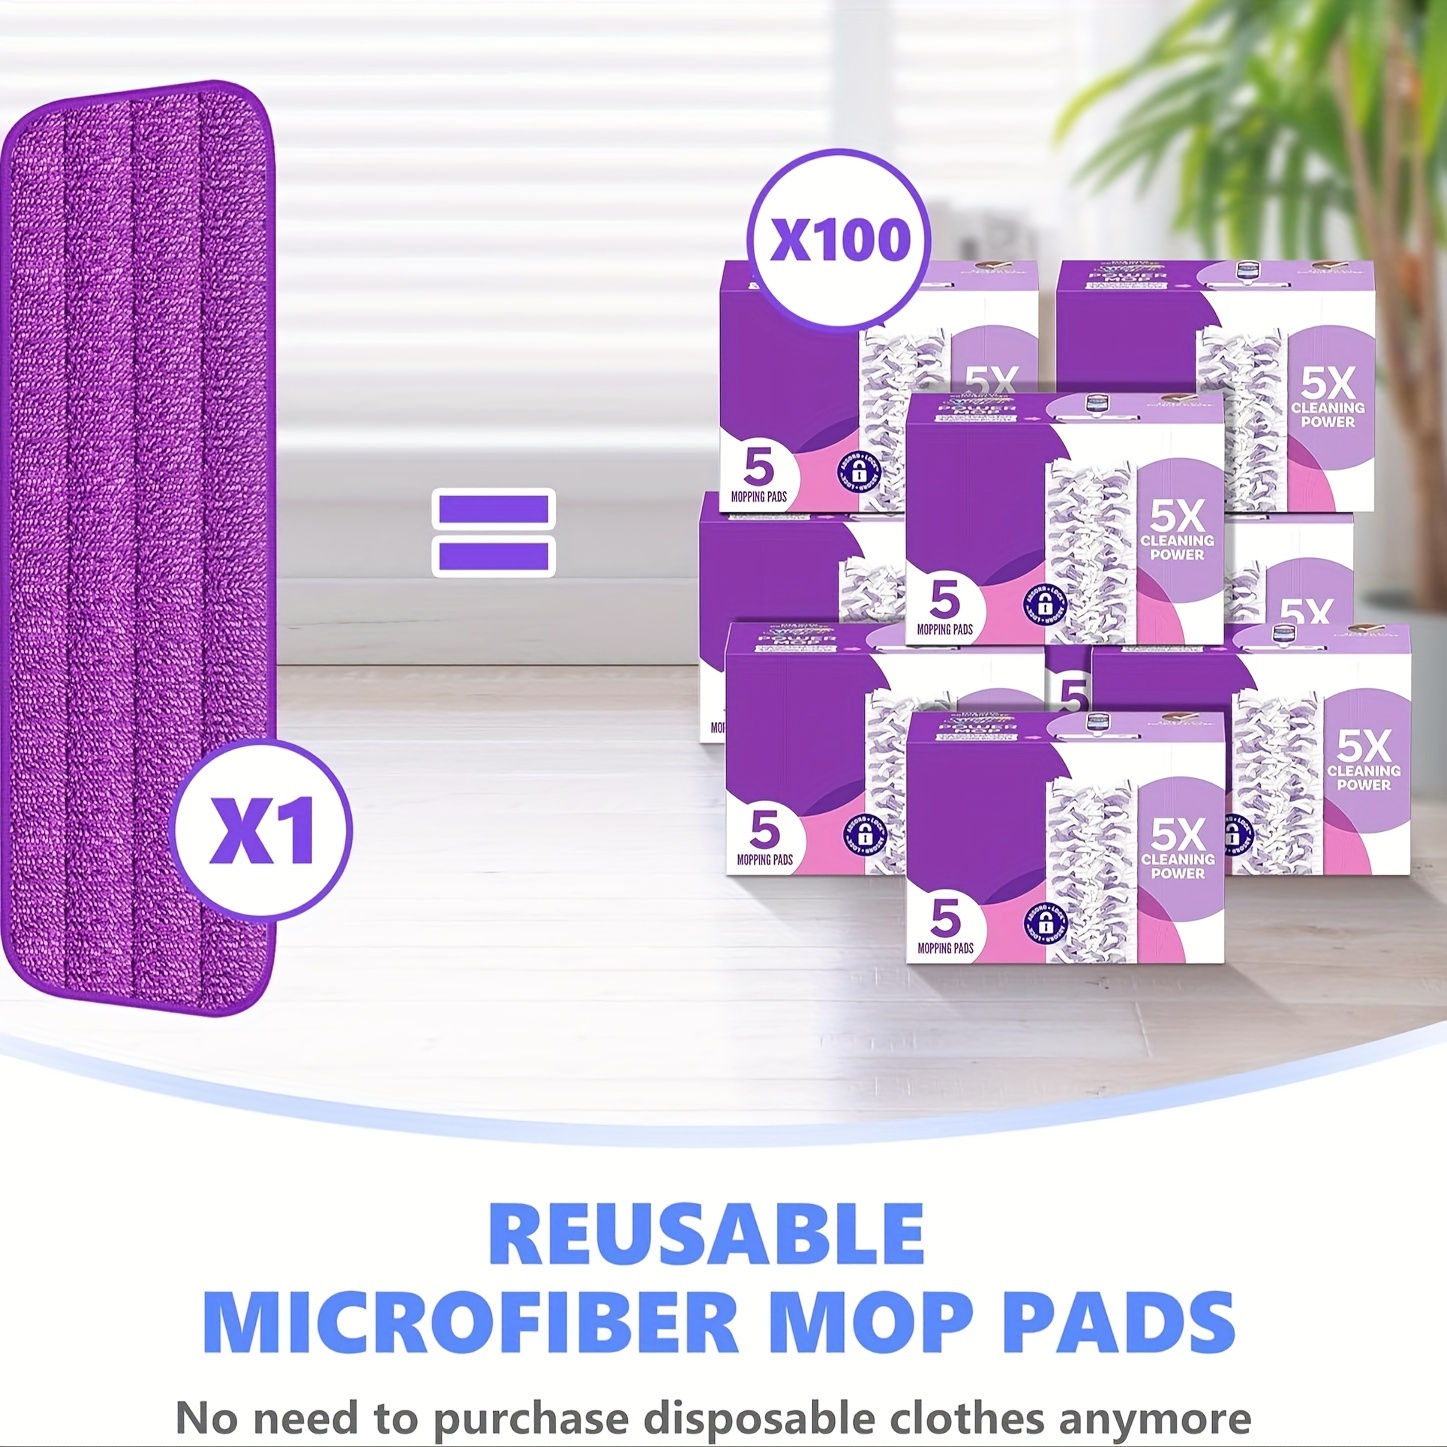 5pcs reusable mop refill pads microfiber power mop refills machine washable power mop pads replacement purple hardwood floor mop cleaning pads 15 3 x 5 1 inch cleaning supplies cleaning accessories